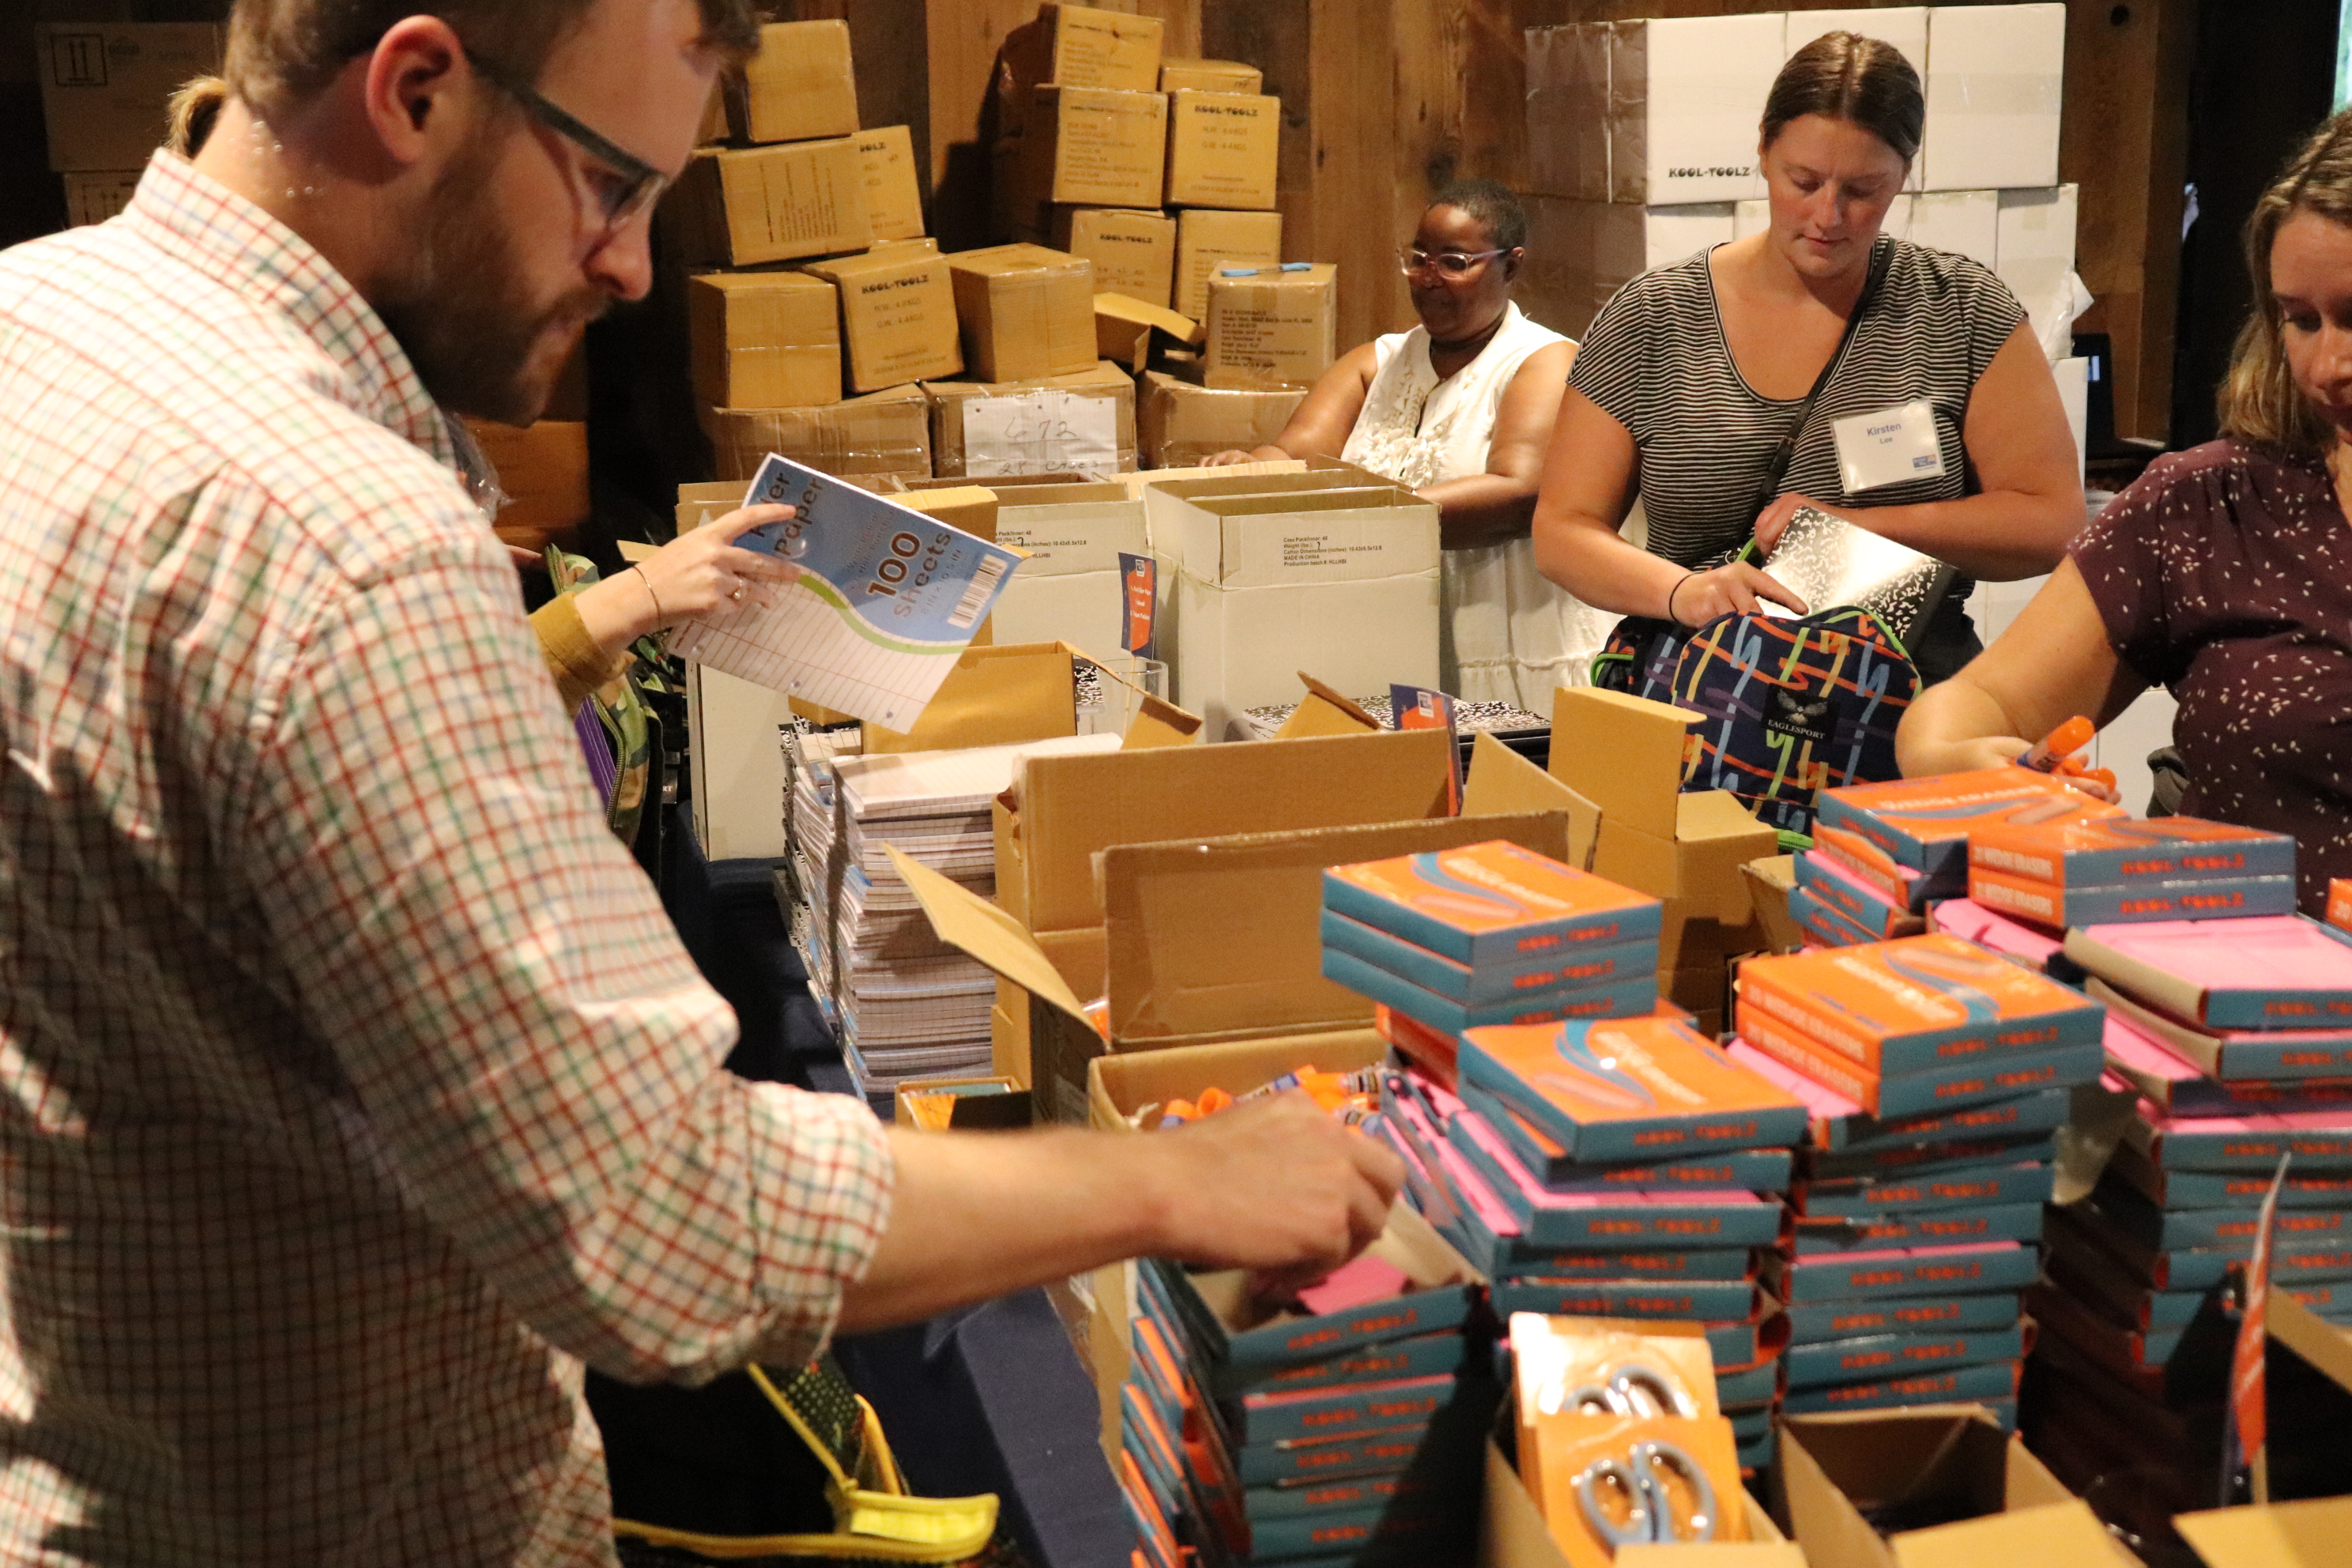 "Multiple volunteers stand around a pile of carboard boxes, books, and other school supplies."